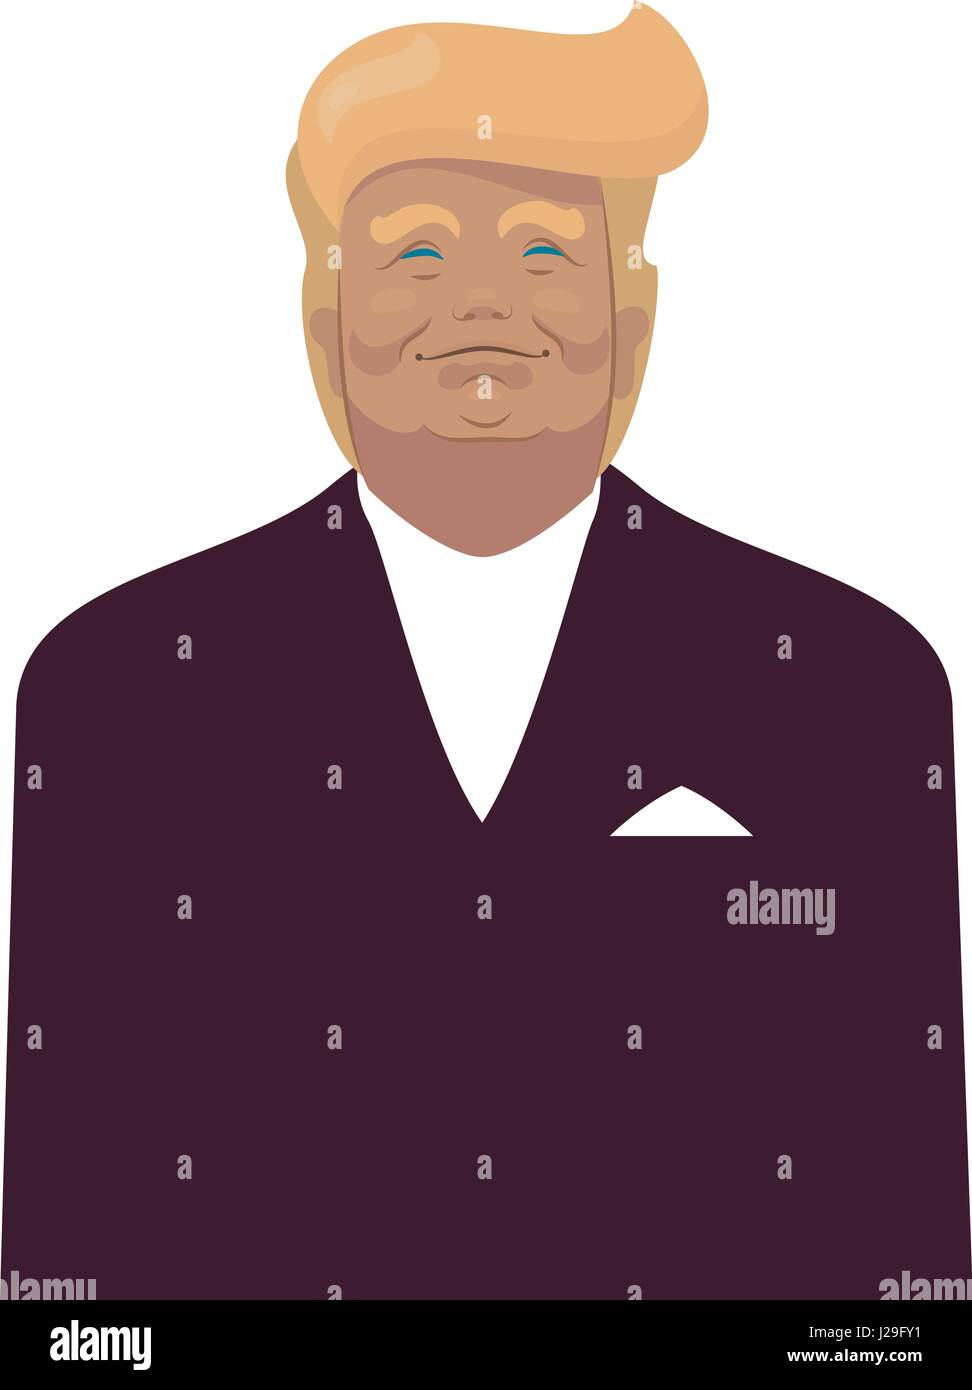 Cartoon Portrait of Donald Trump President of the United States of America USA Stock Vector